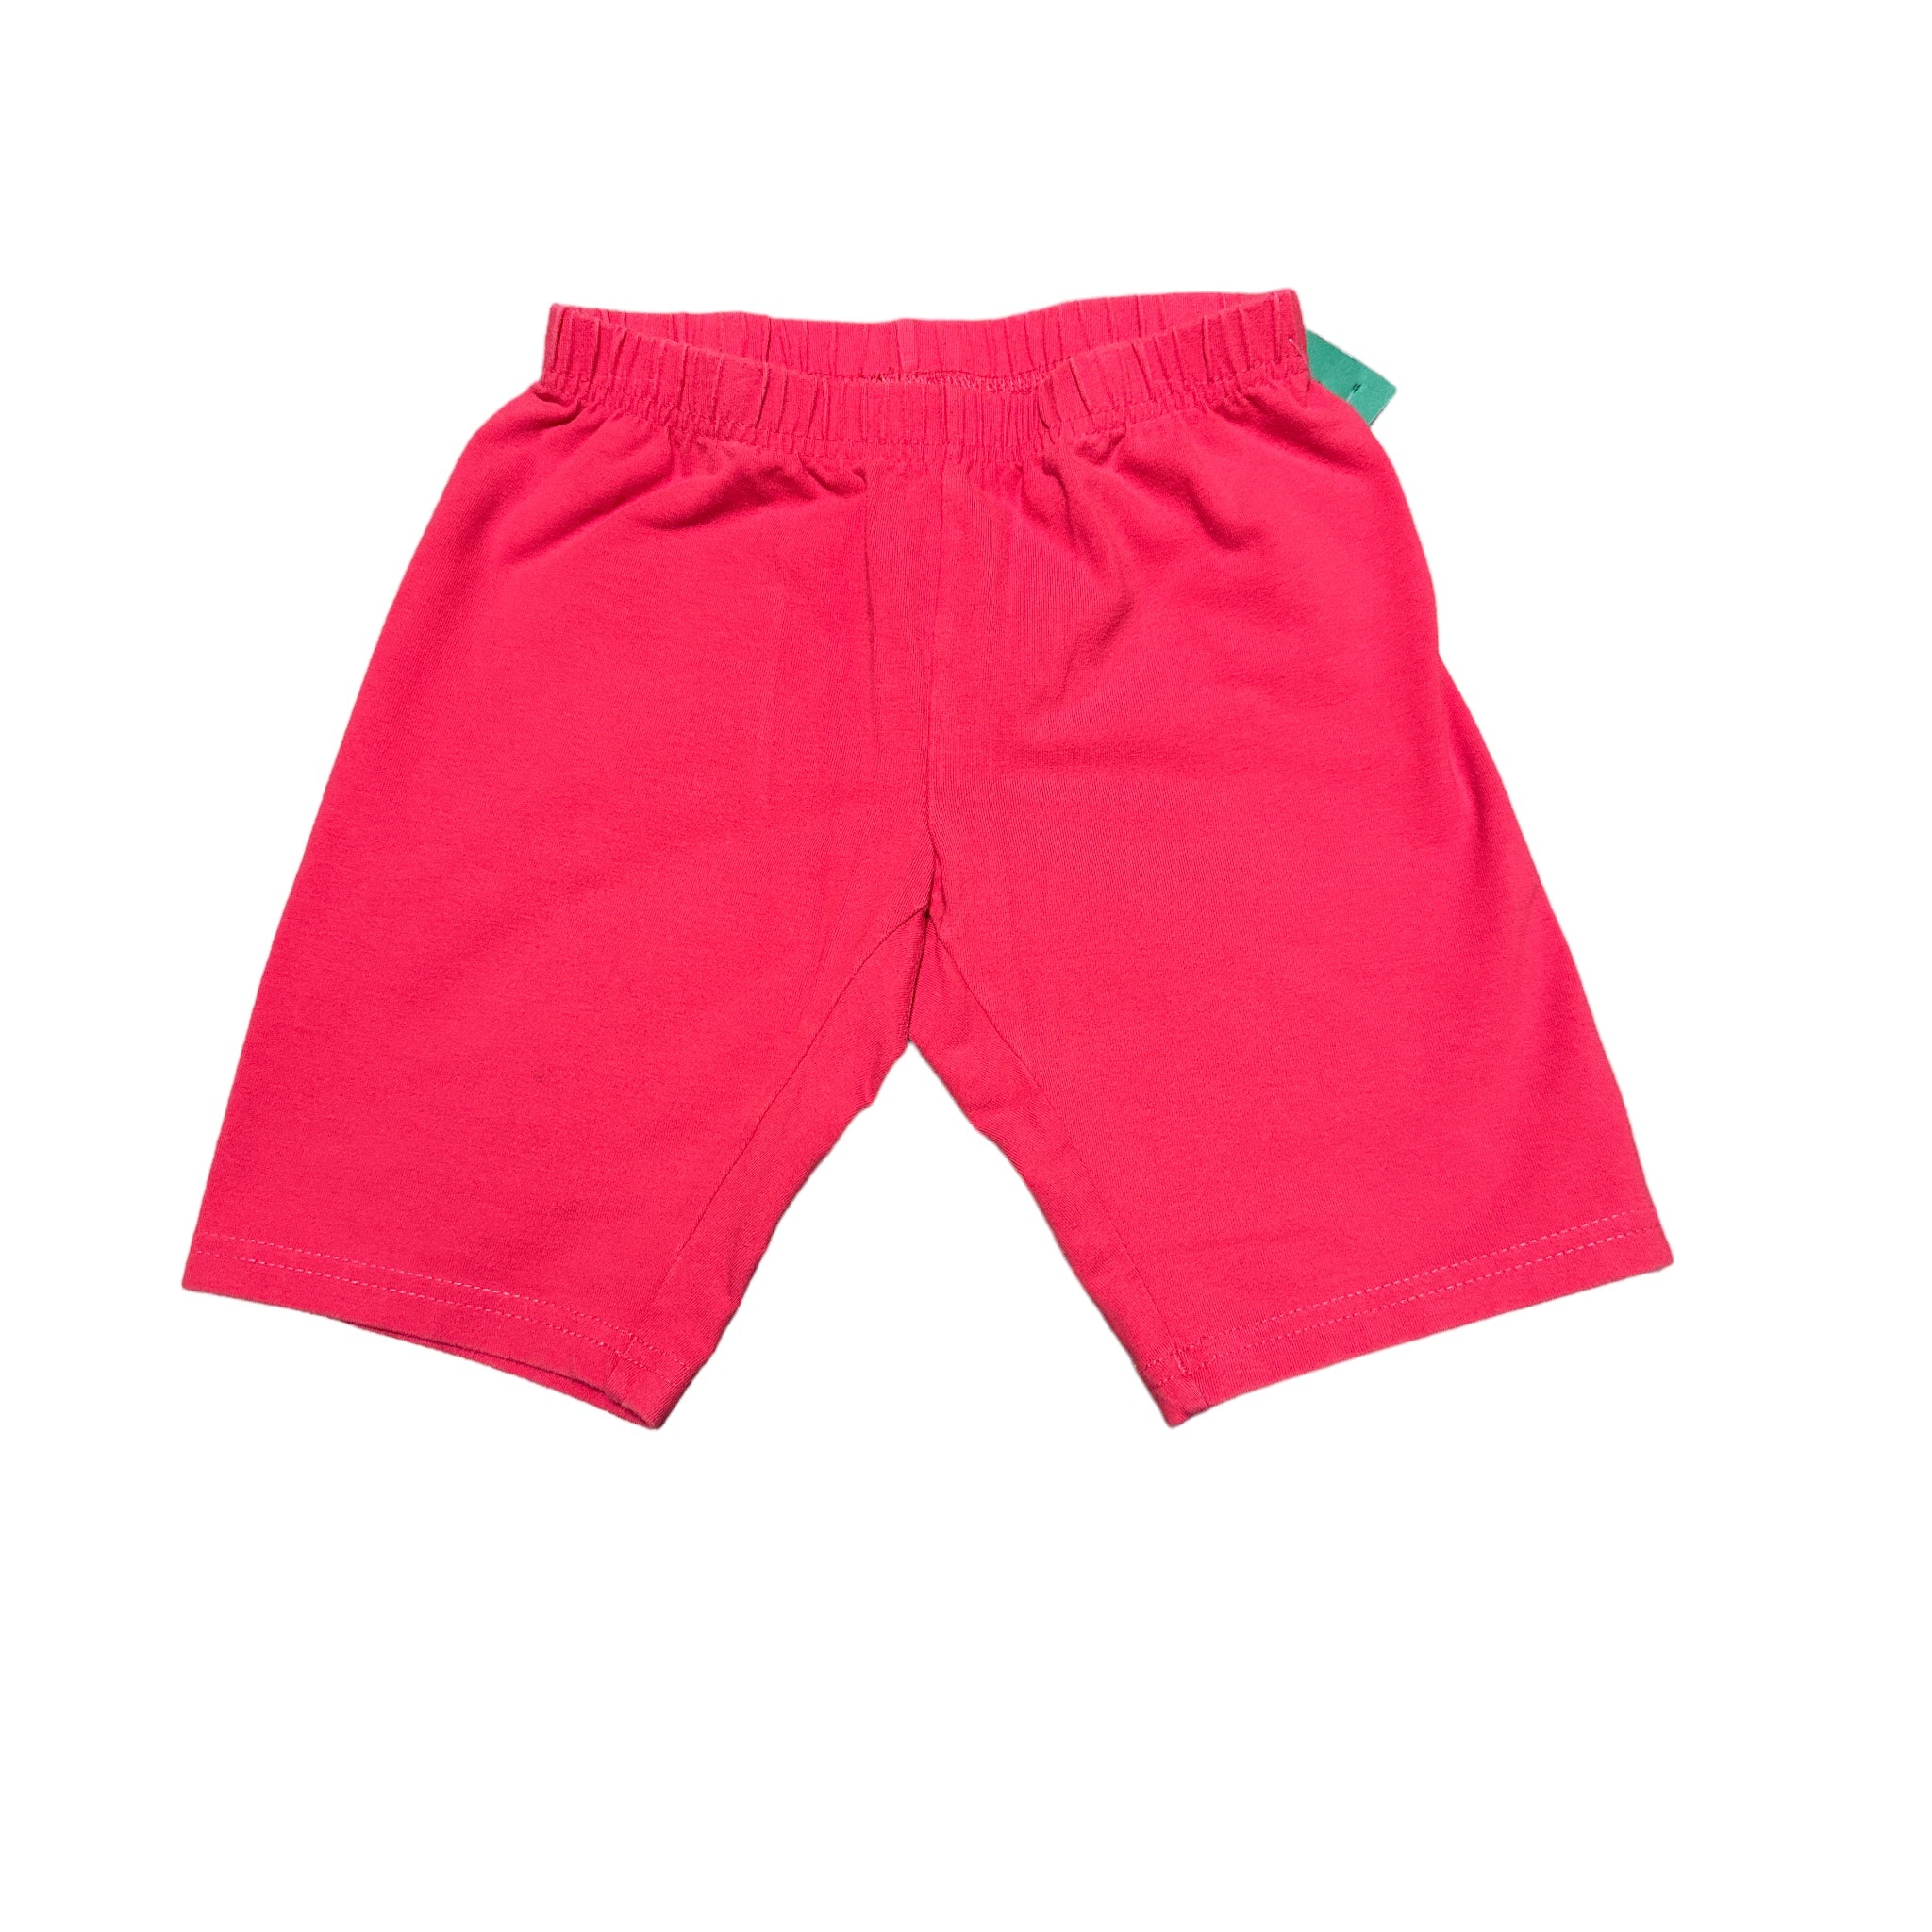 Shorts Hanna Andersson Size 8